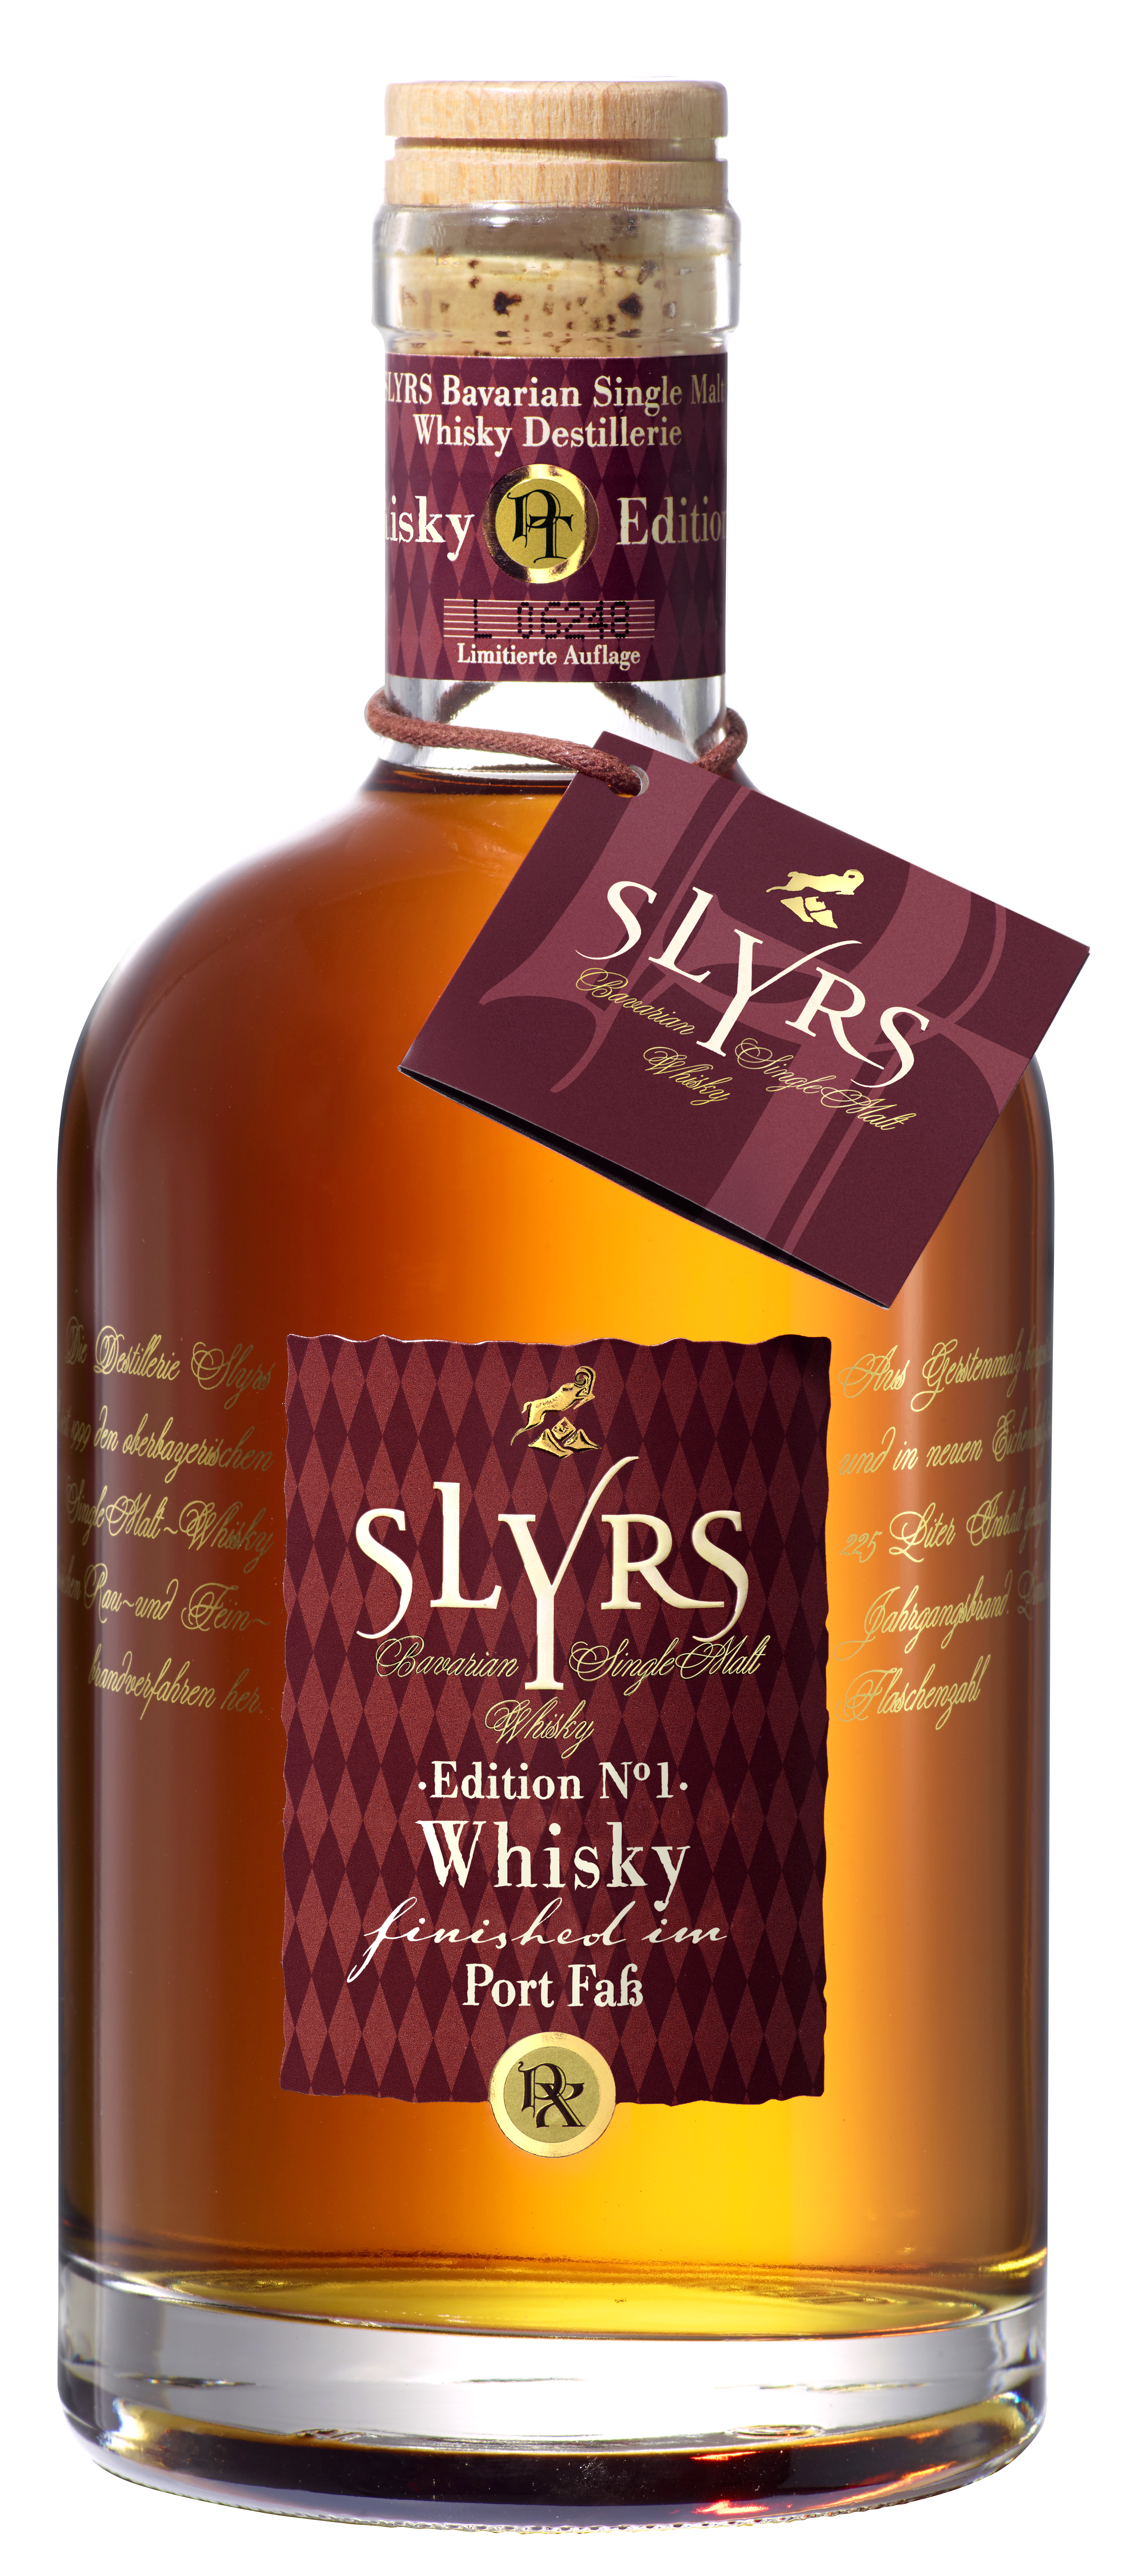 Slyrs Whisky Port Fass Edition No.1